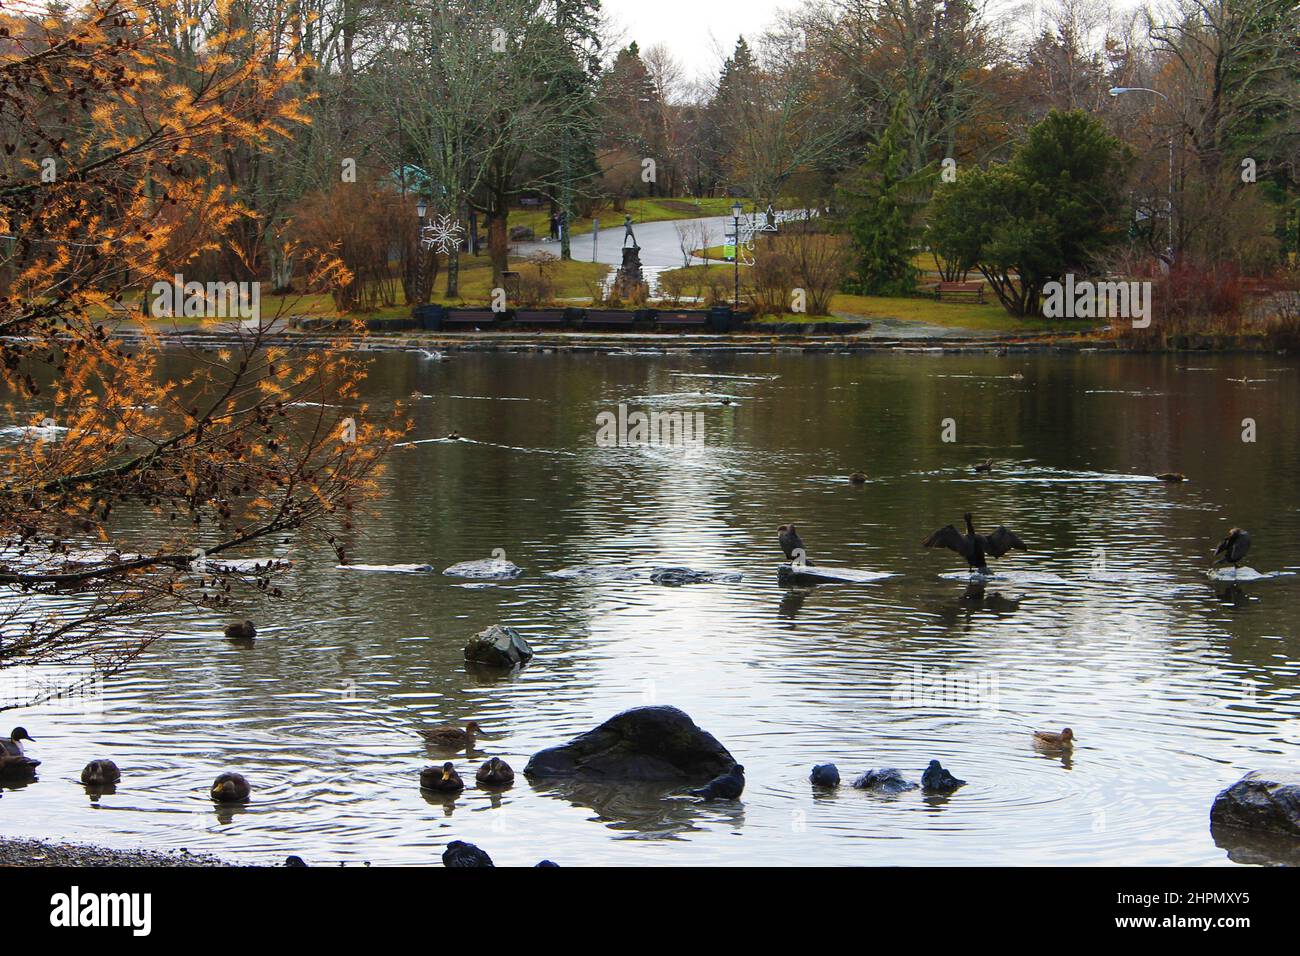 Ducks and pigeons in and around the pond, Bowring Park, St. John's, NL, Autumn. Peter Pan statue in background created by Sir George Frampton 1925. Stock Photo